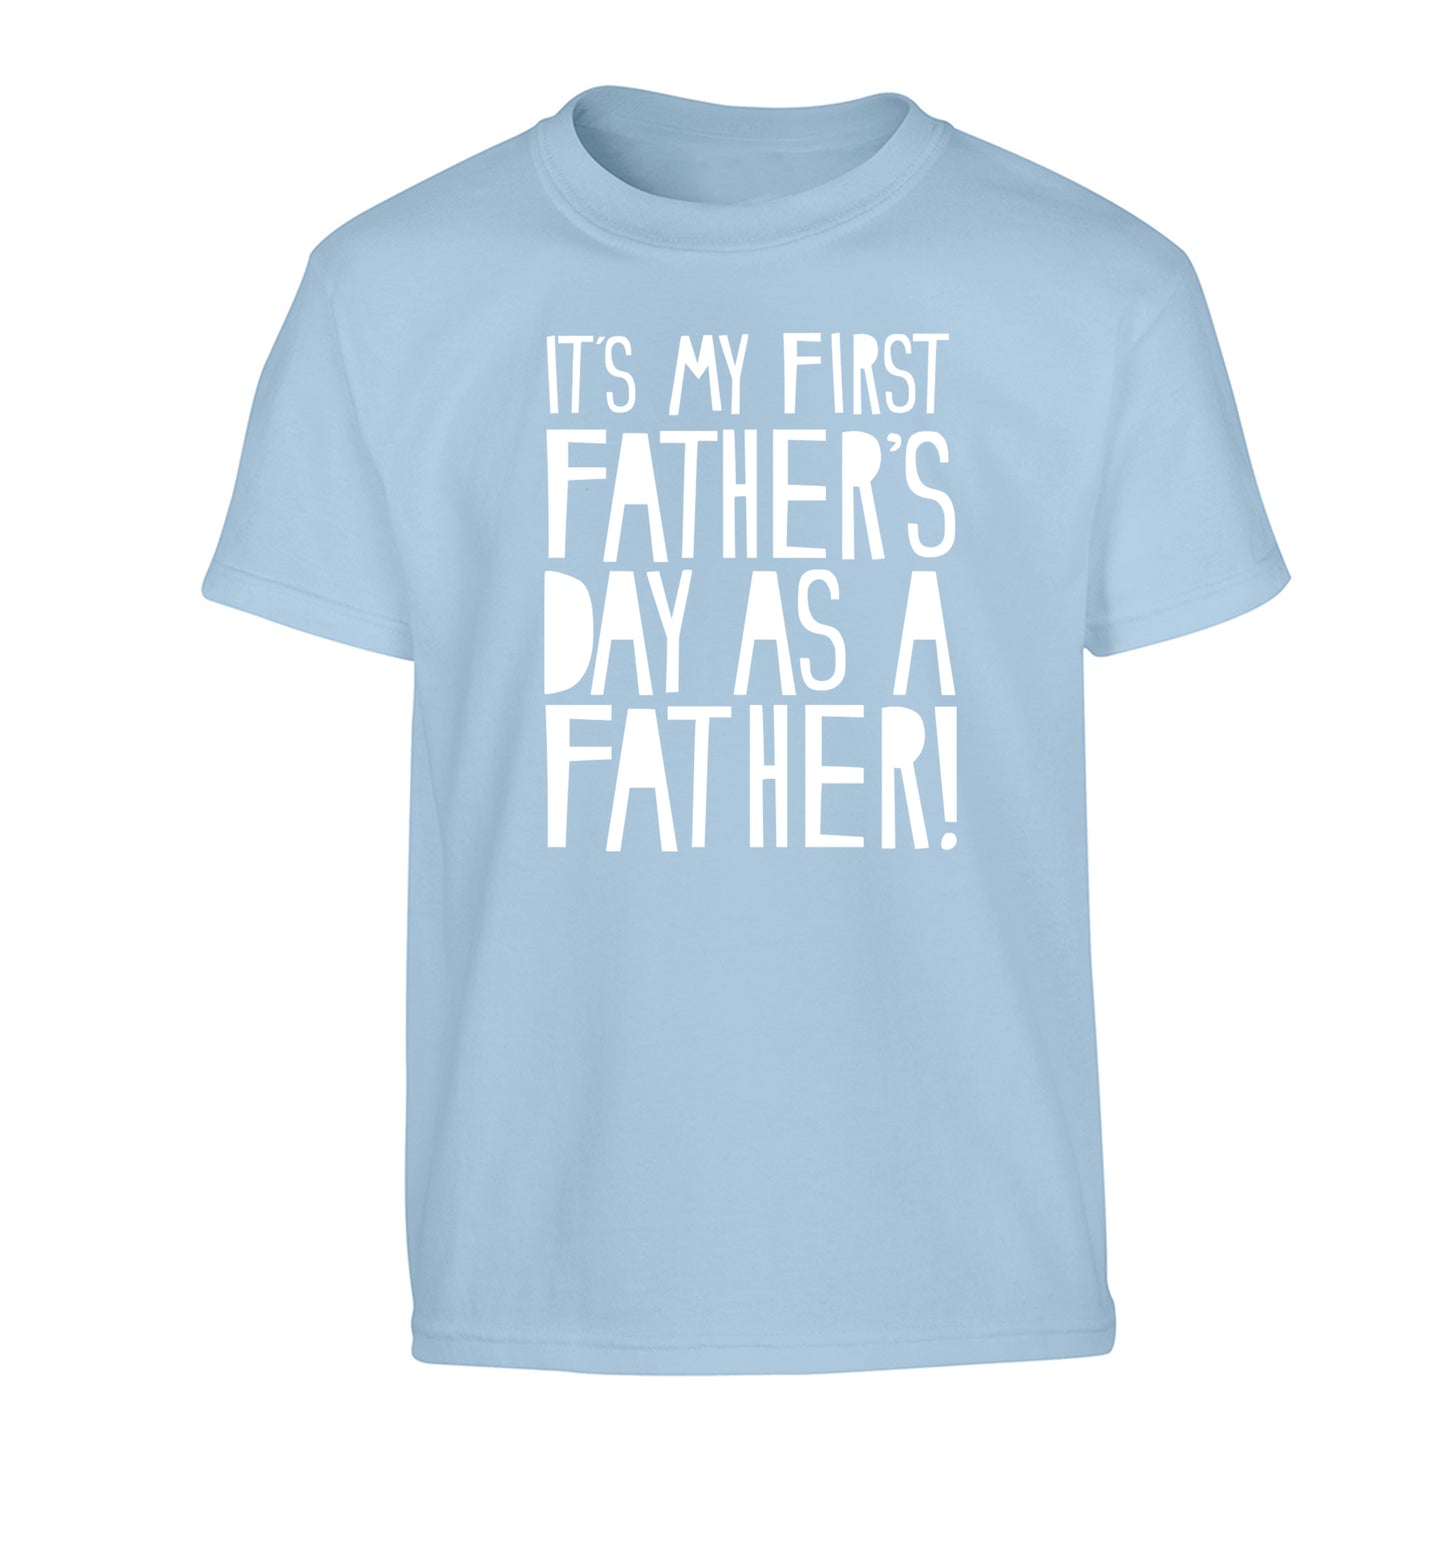 It's my first Father's Day as a father! Children's light blue Tshirt 12-13 Years